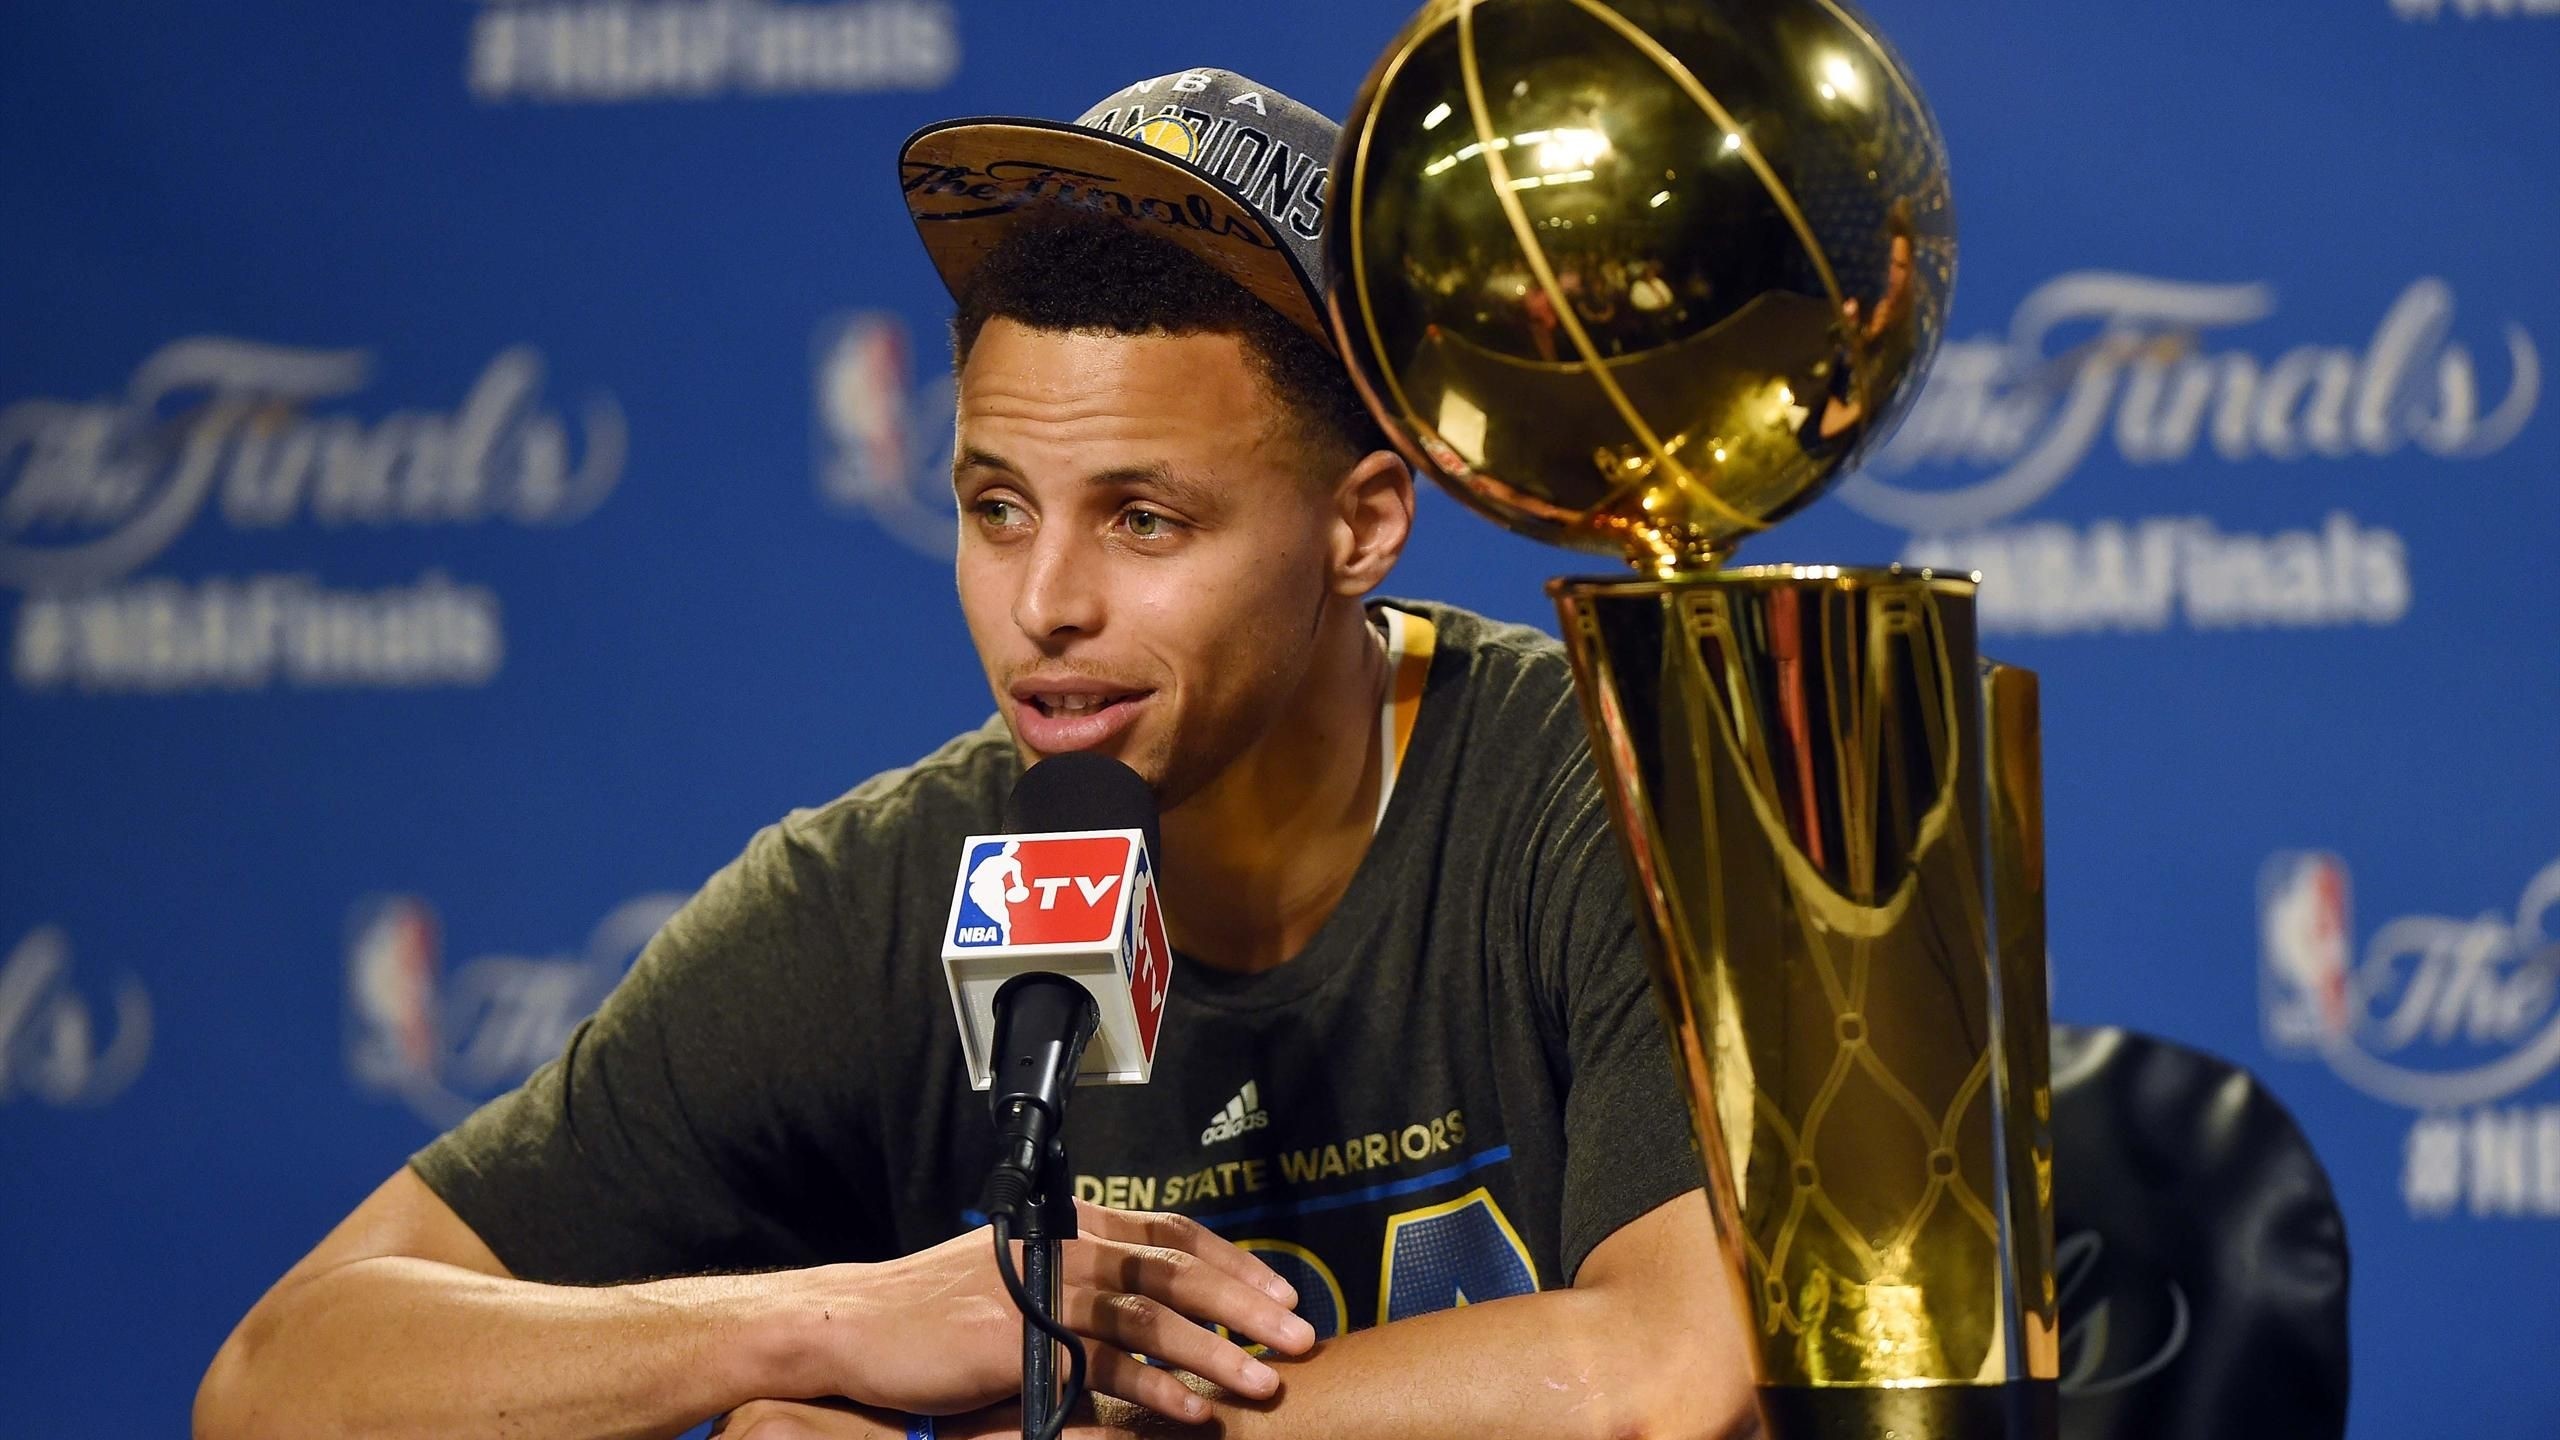 2560x1440 stephen curry Full HD Wallpaper and Background Image | 1920x1080